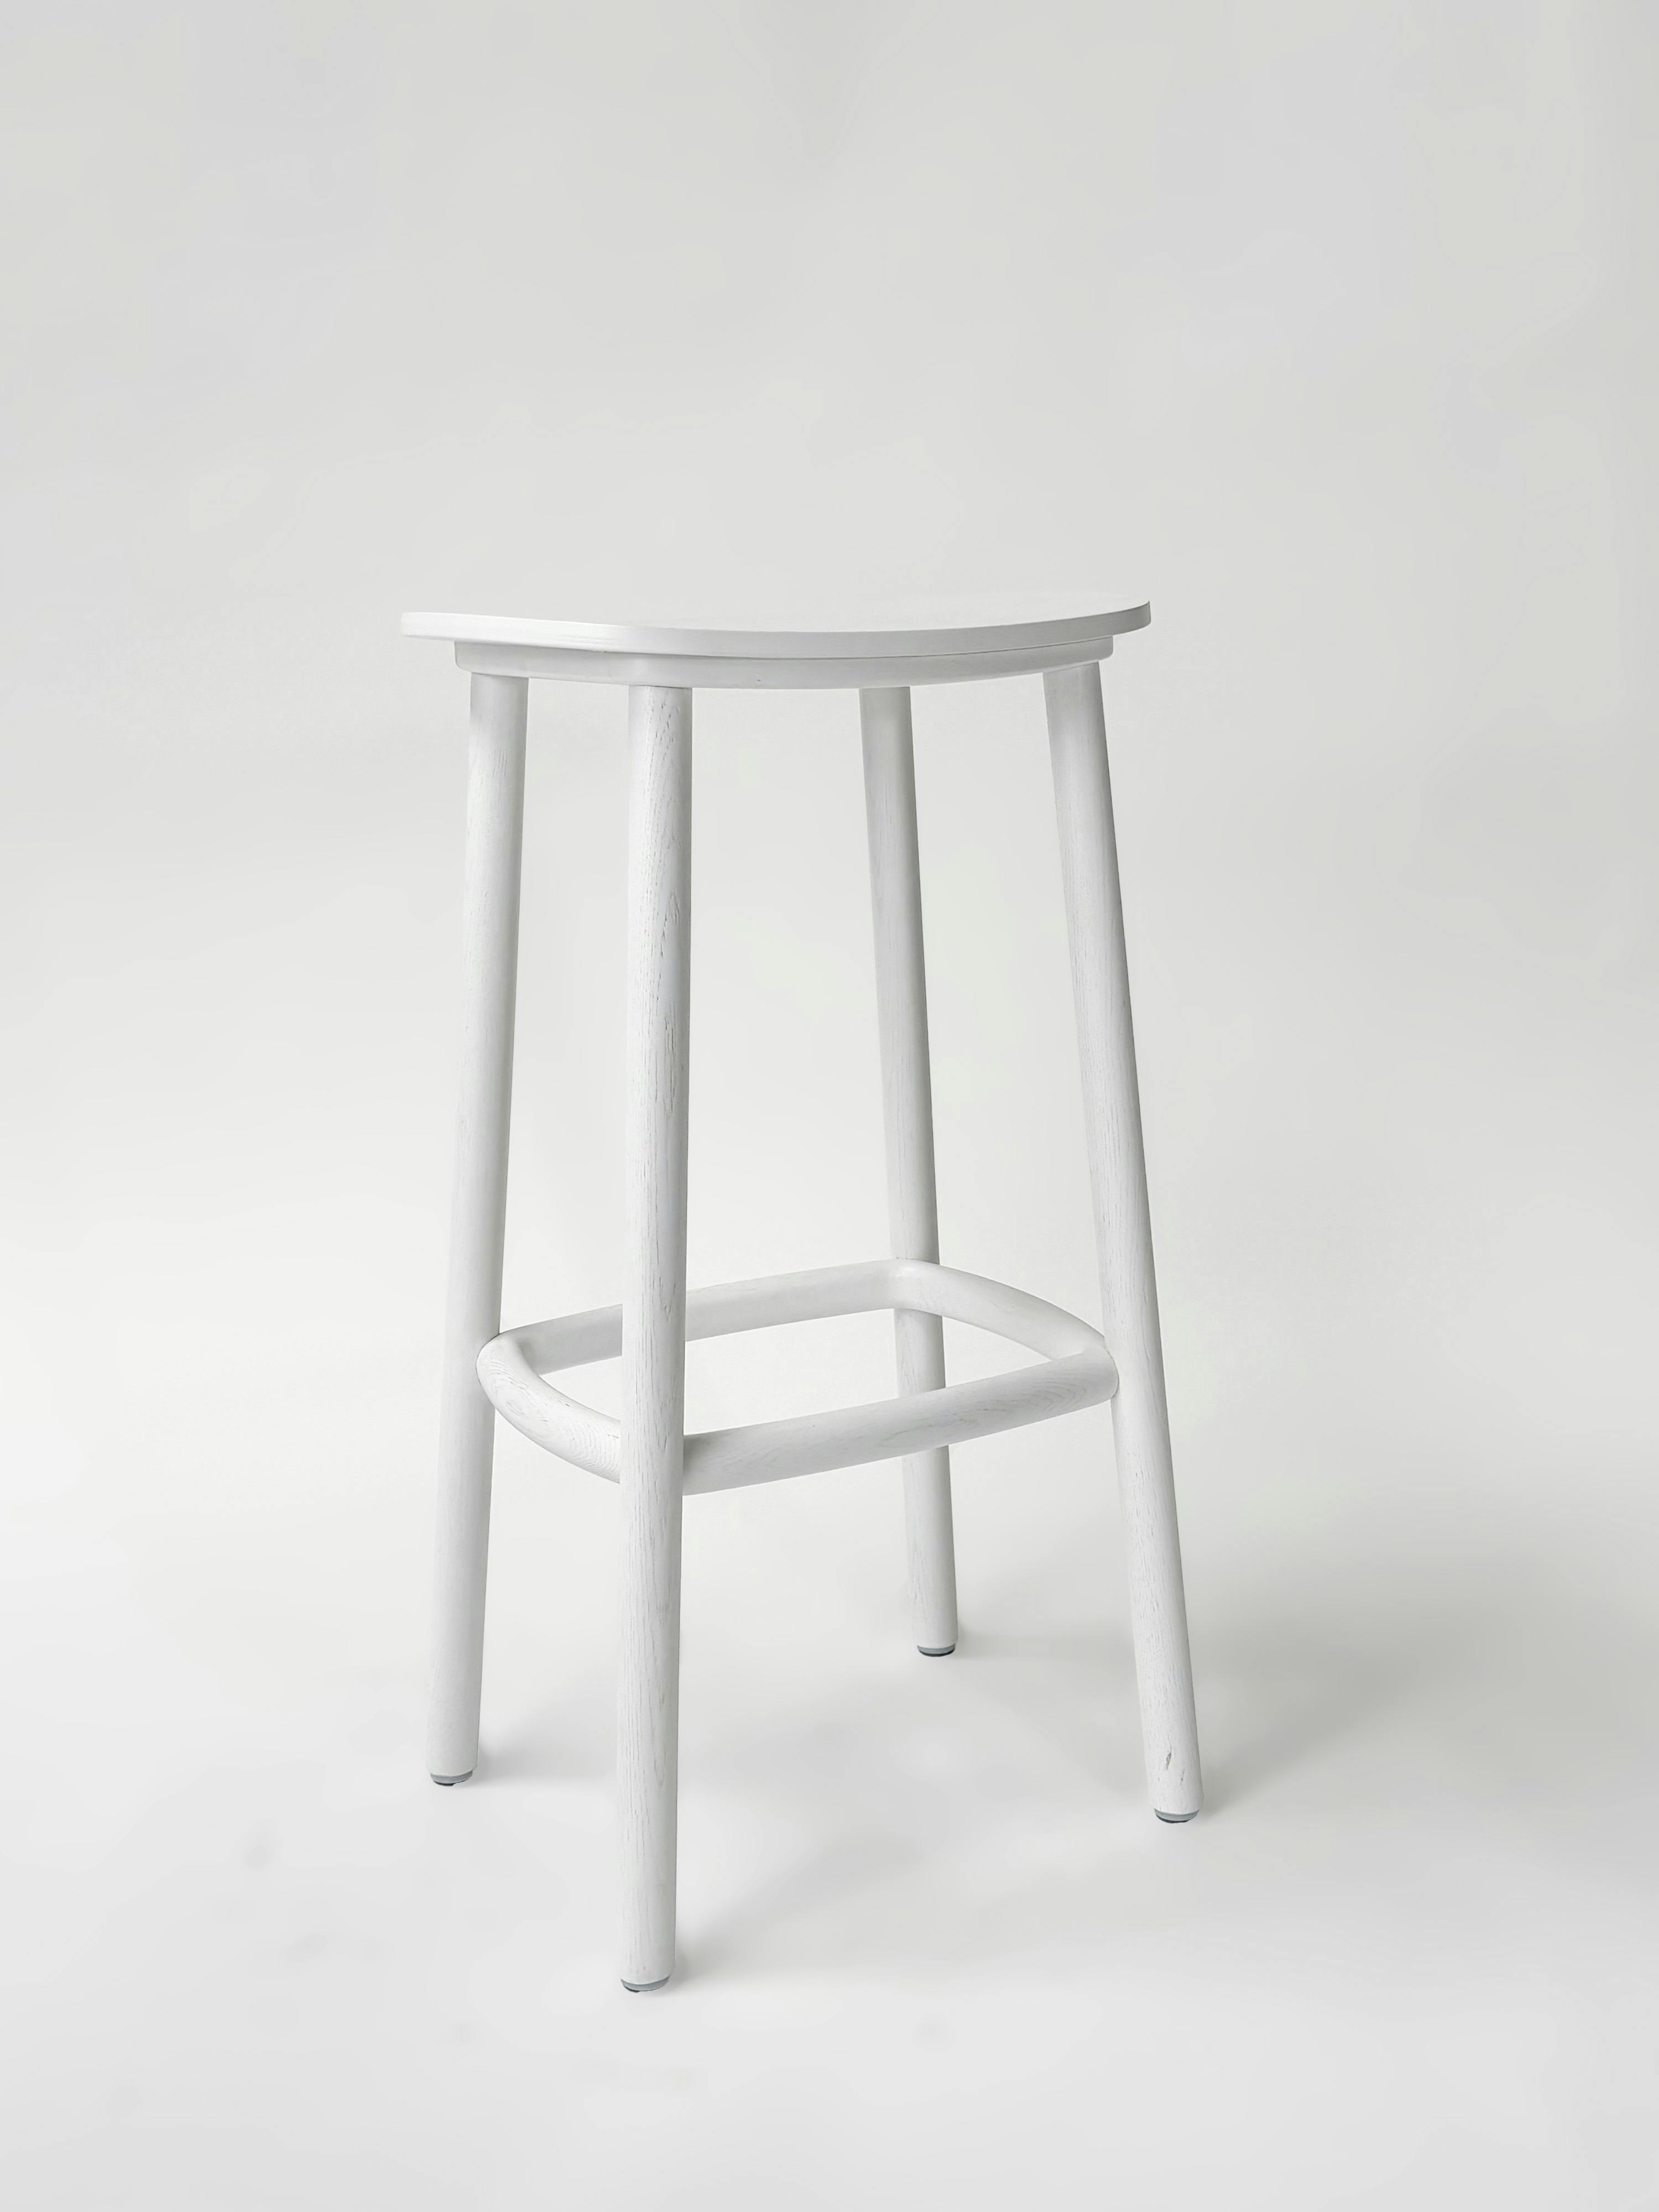 CRUSO White Wooden Stool - 75cm - Relieve Furniture